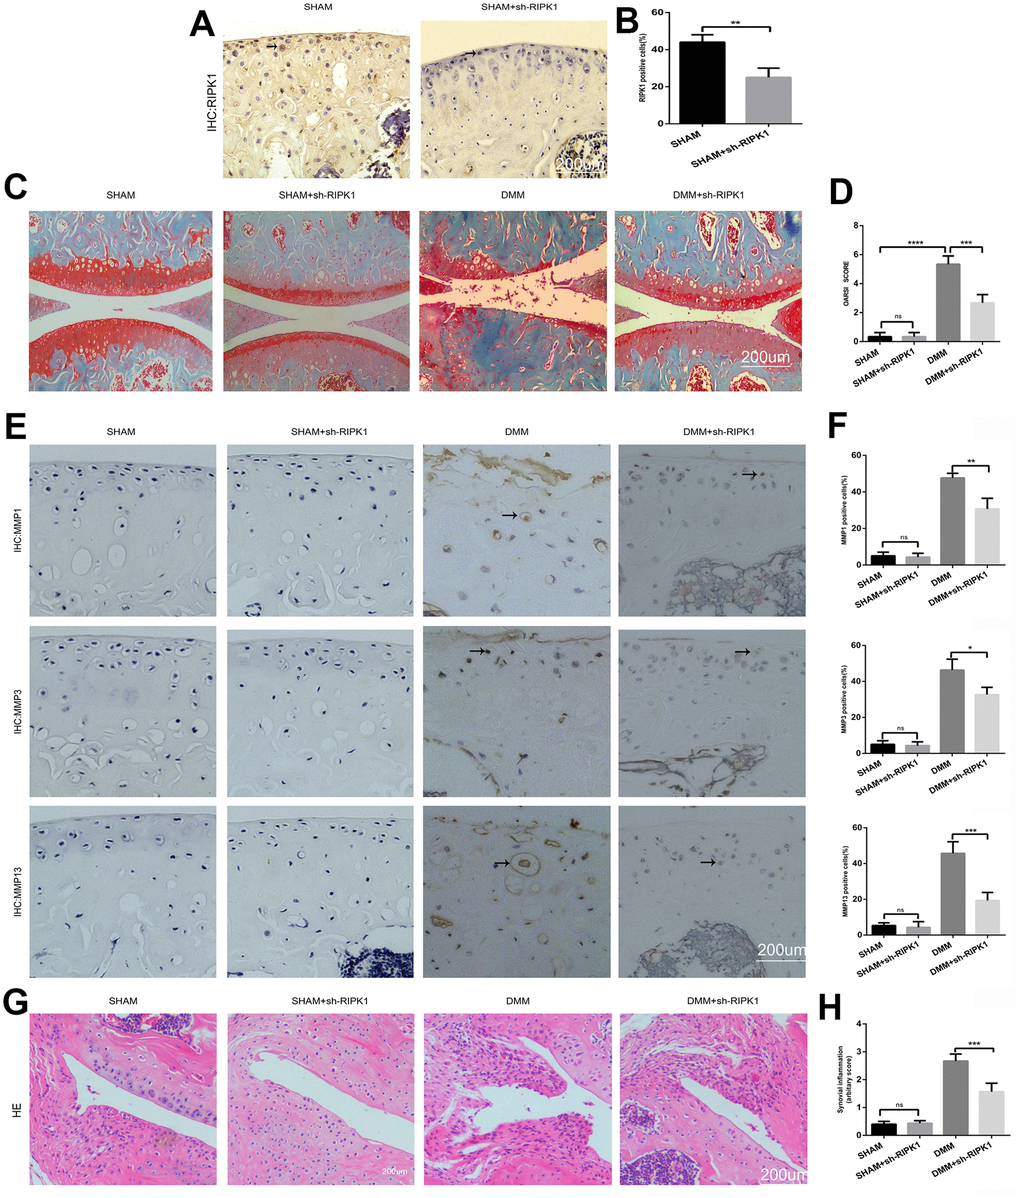 Knockdown of receptor interacting serine/threonine kinase (RIPK) 1 attenuates cartilage degeneration in vivo. (A, B) Immunohistochemical staining of RIPK1 in mice transfected with Ad-NC and Ad-shRIPK1 (n = 10); scale bar = 200 μm. (C, D) Safranin O/Fast Green-stained articular cartilage; the degree of cartilage degeneration was evaluated by calculating the OARSI score (n = 10); scale bar = 200 μm. (E, F) Immunohistochemical staining of matrix metalloproteinases (MMPs; n = 10); scale bar = 200 μm. (G, H) Representative HE-stained images and synovial inflammation scores (n = 10); scale bar = 200 μm. Columns represent means ± SD. *p 